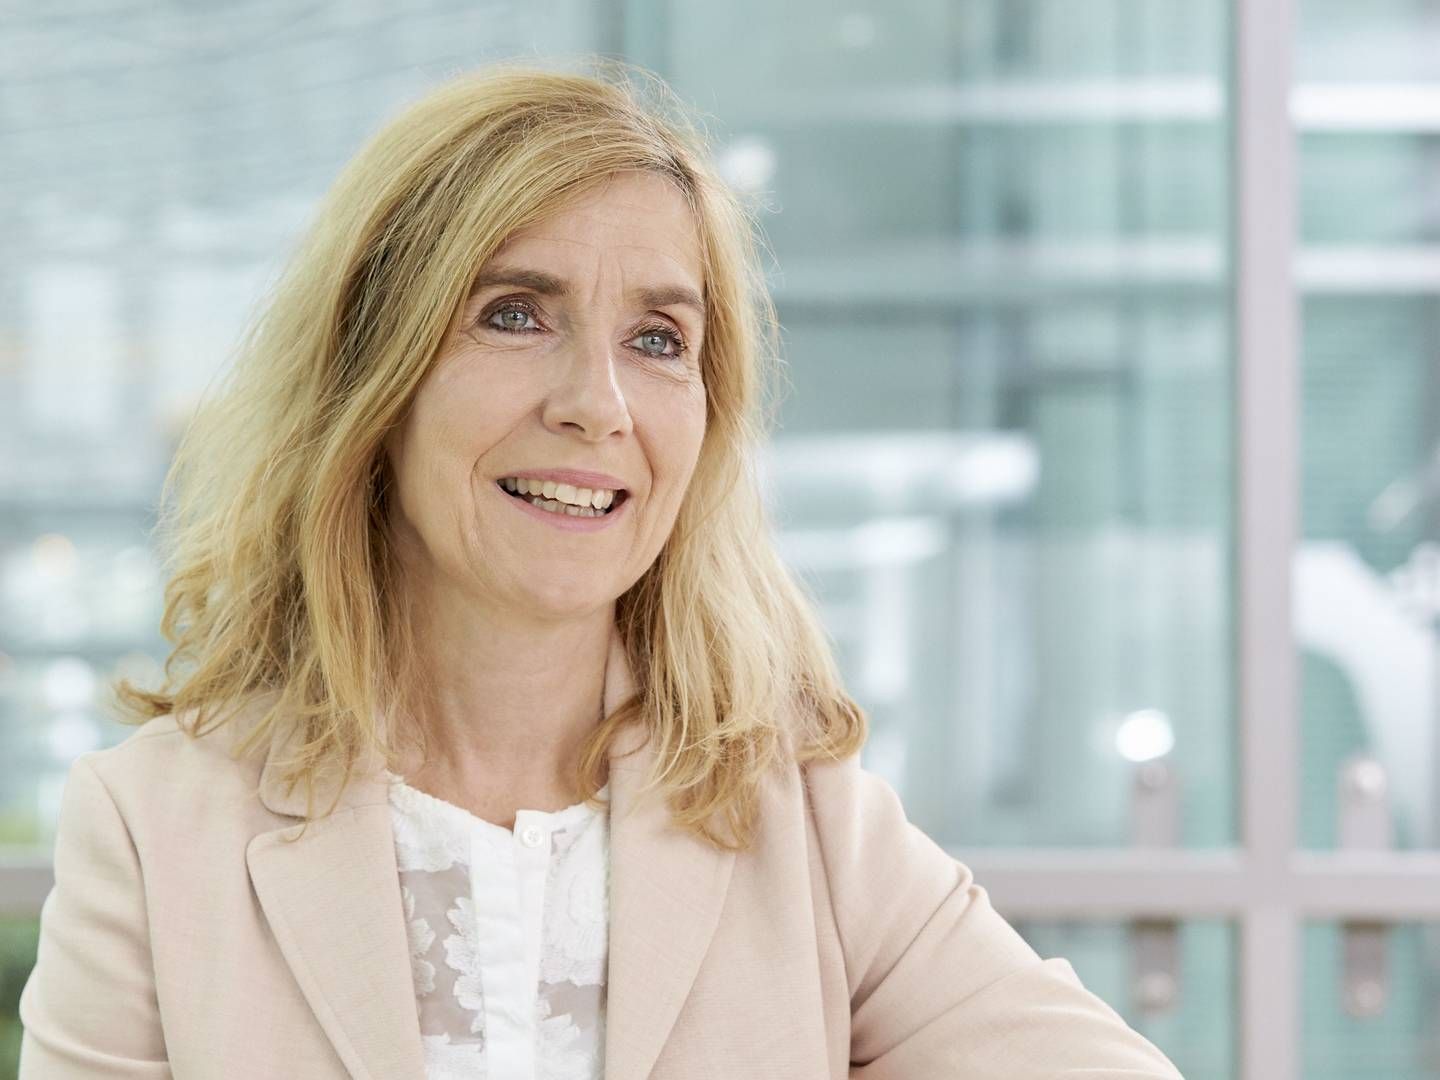 "I like being a part of making real change," says Marianne Wiinholt, describing her new role as chief financial officer of WS Audiology | Photo: Ørsted